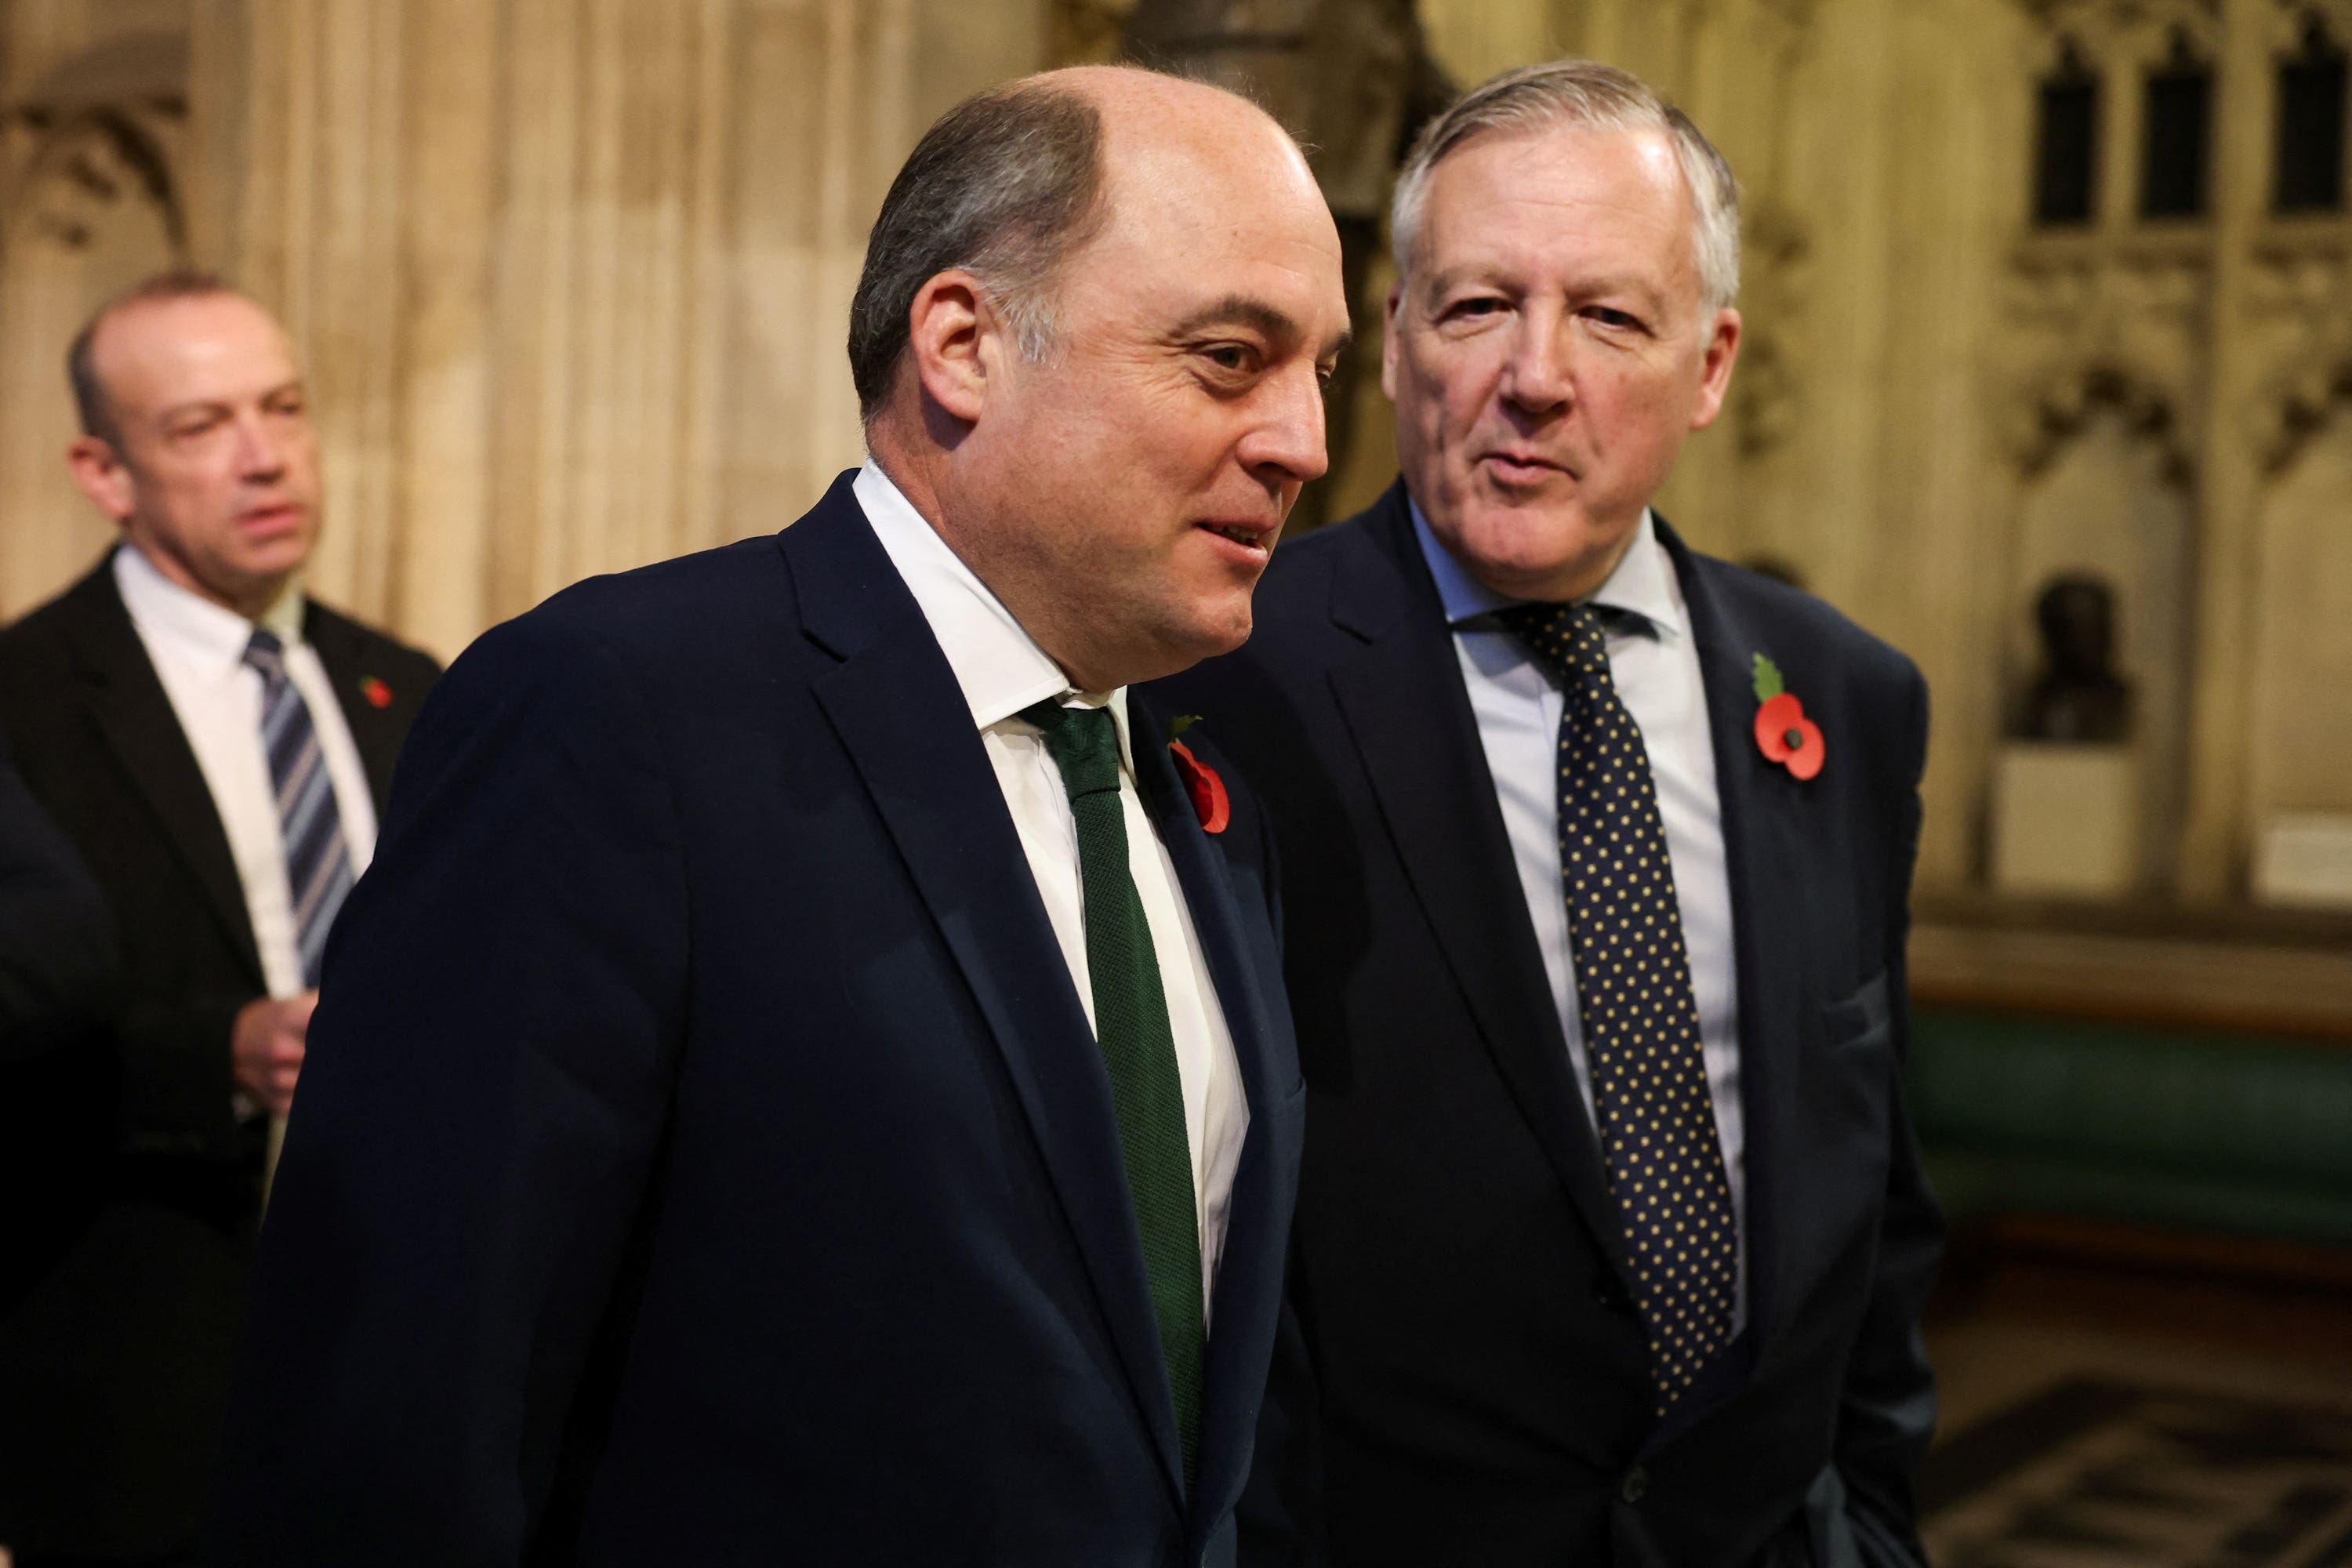 Ben Wallace (centre) walks through the Members’ Lobby at the Palace of Westminster following the State Opening of Parliament in the House of Lords, London (PA)